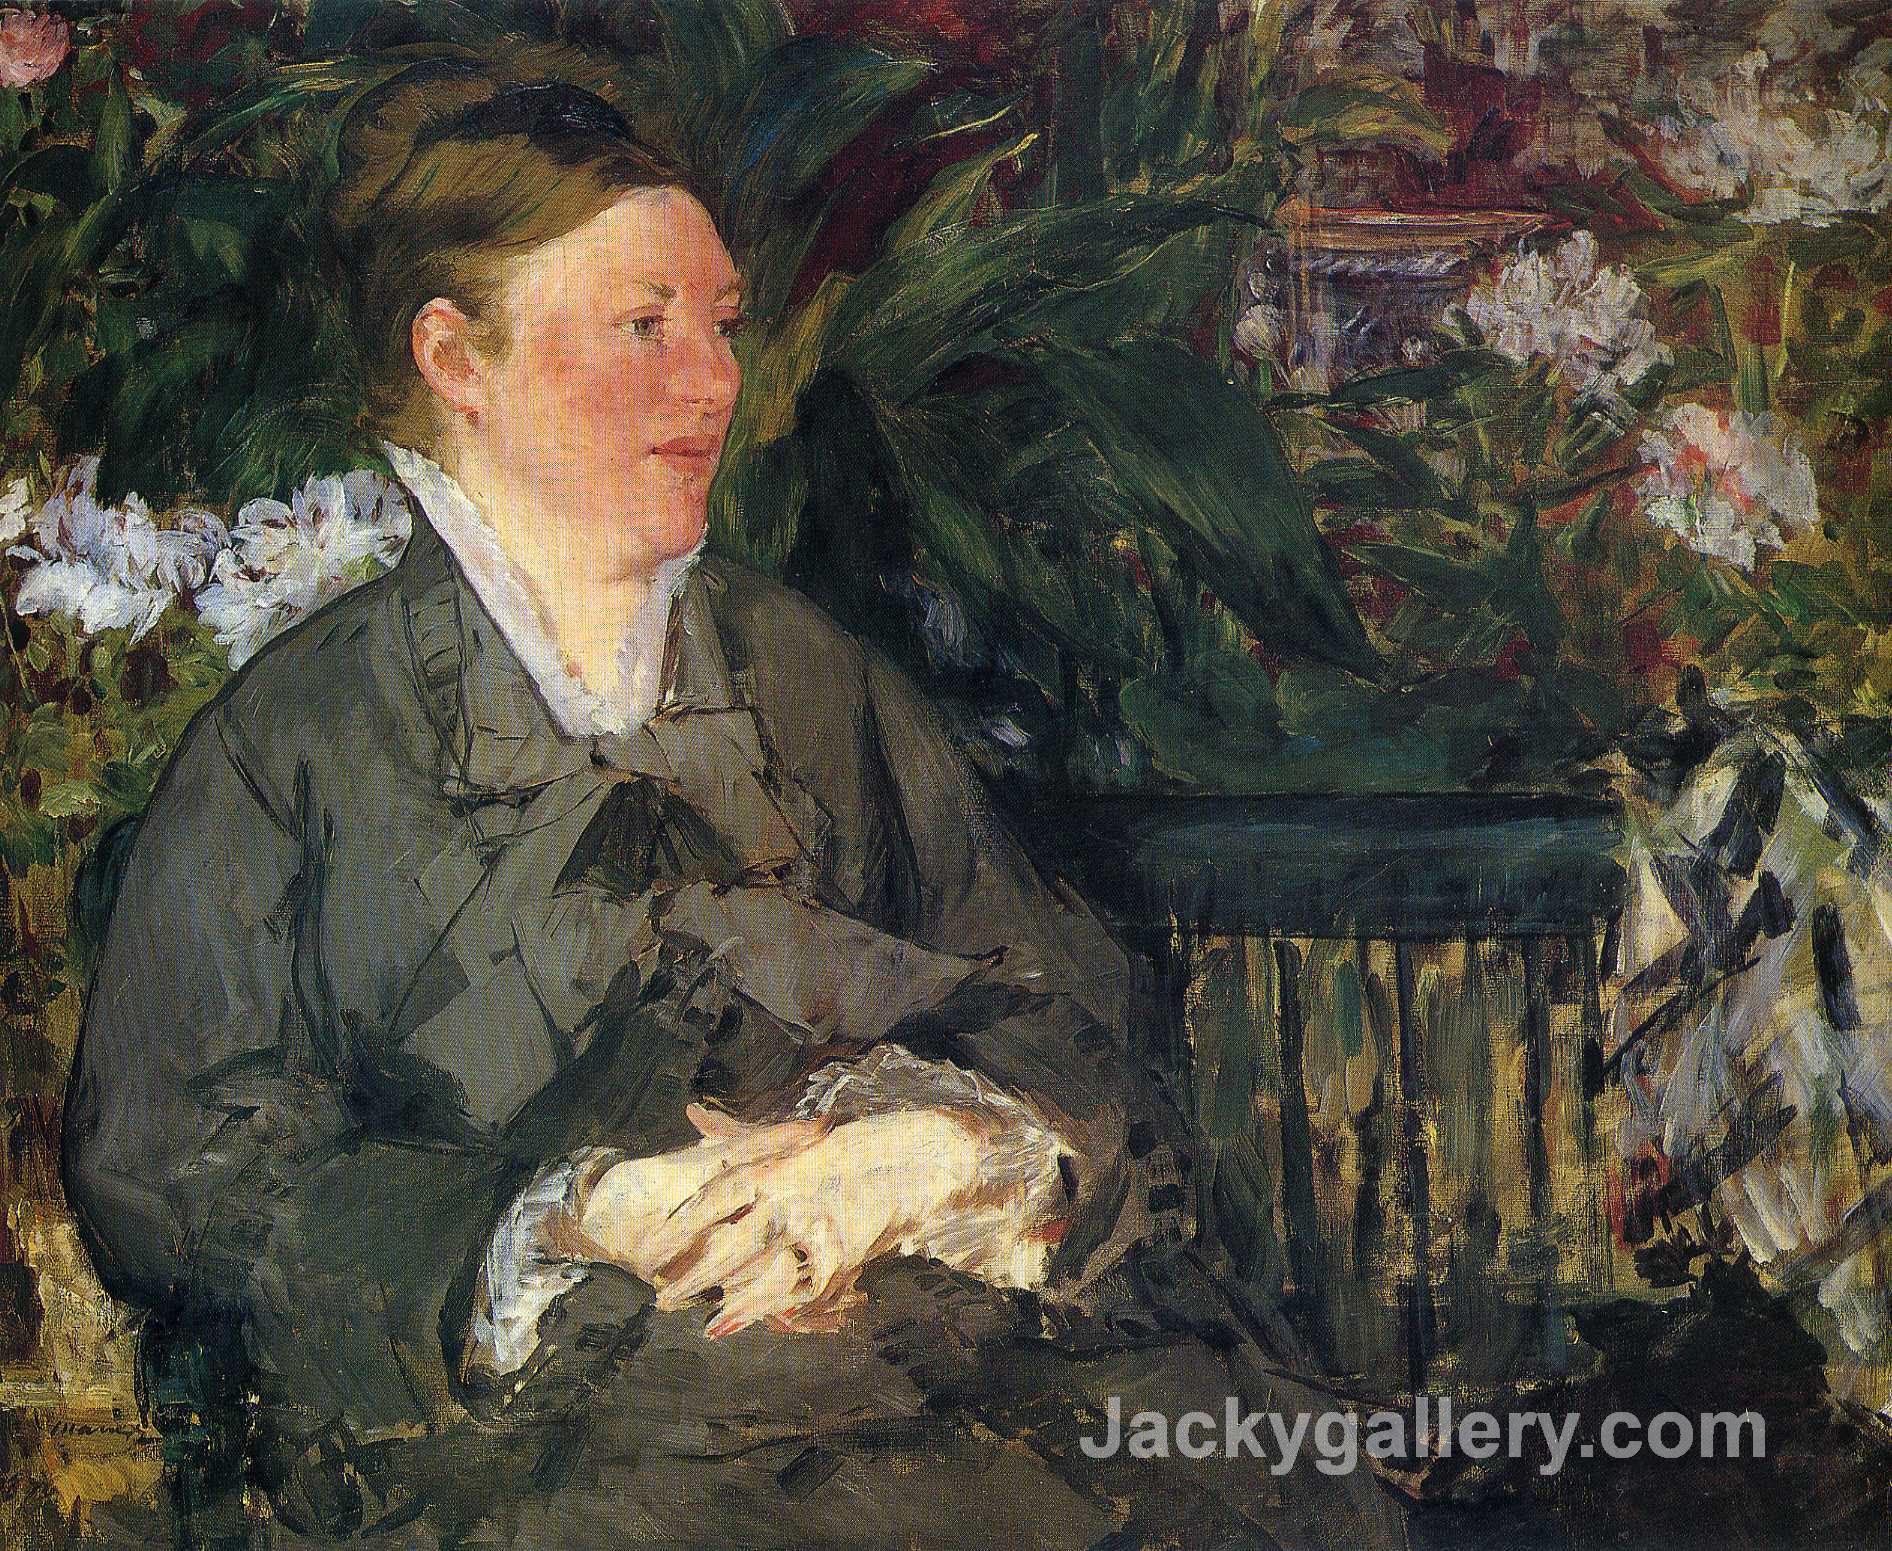 Madame Manet in conservatory by Edouard Manet paintings reproduction